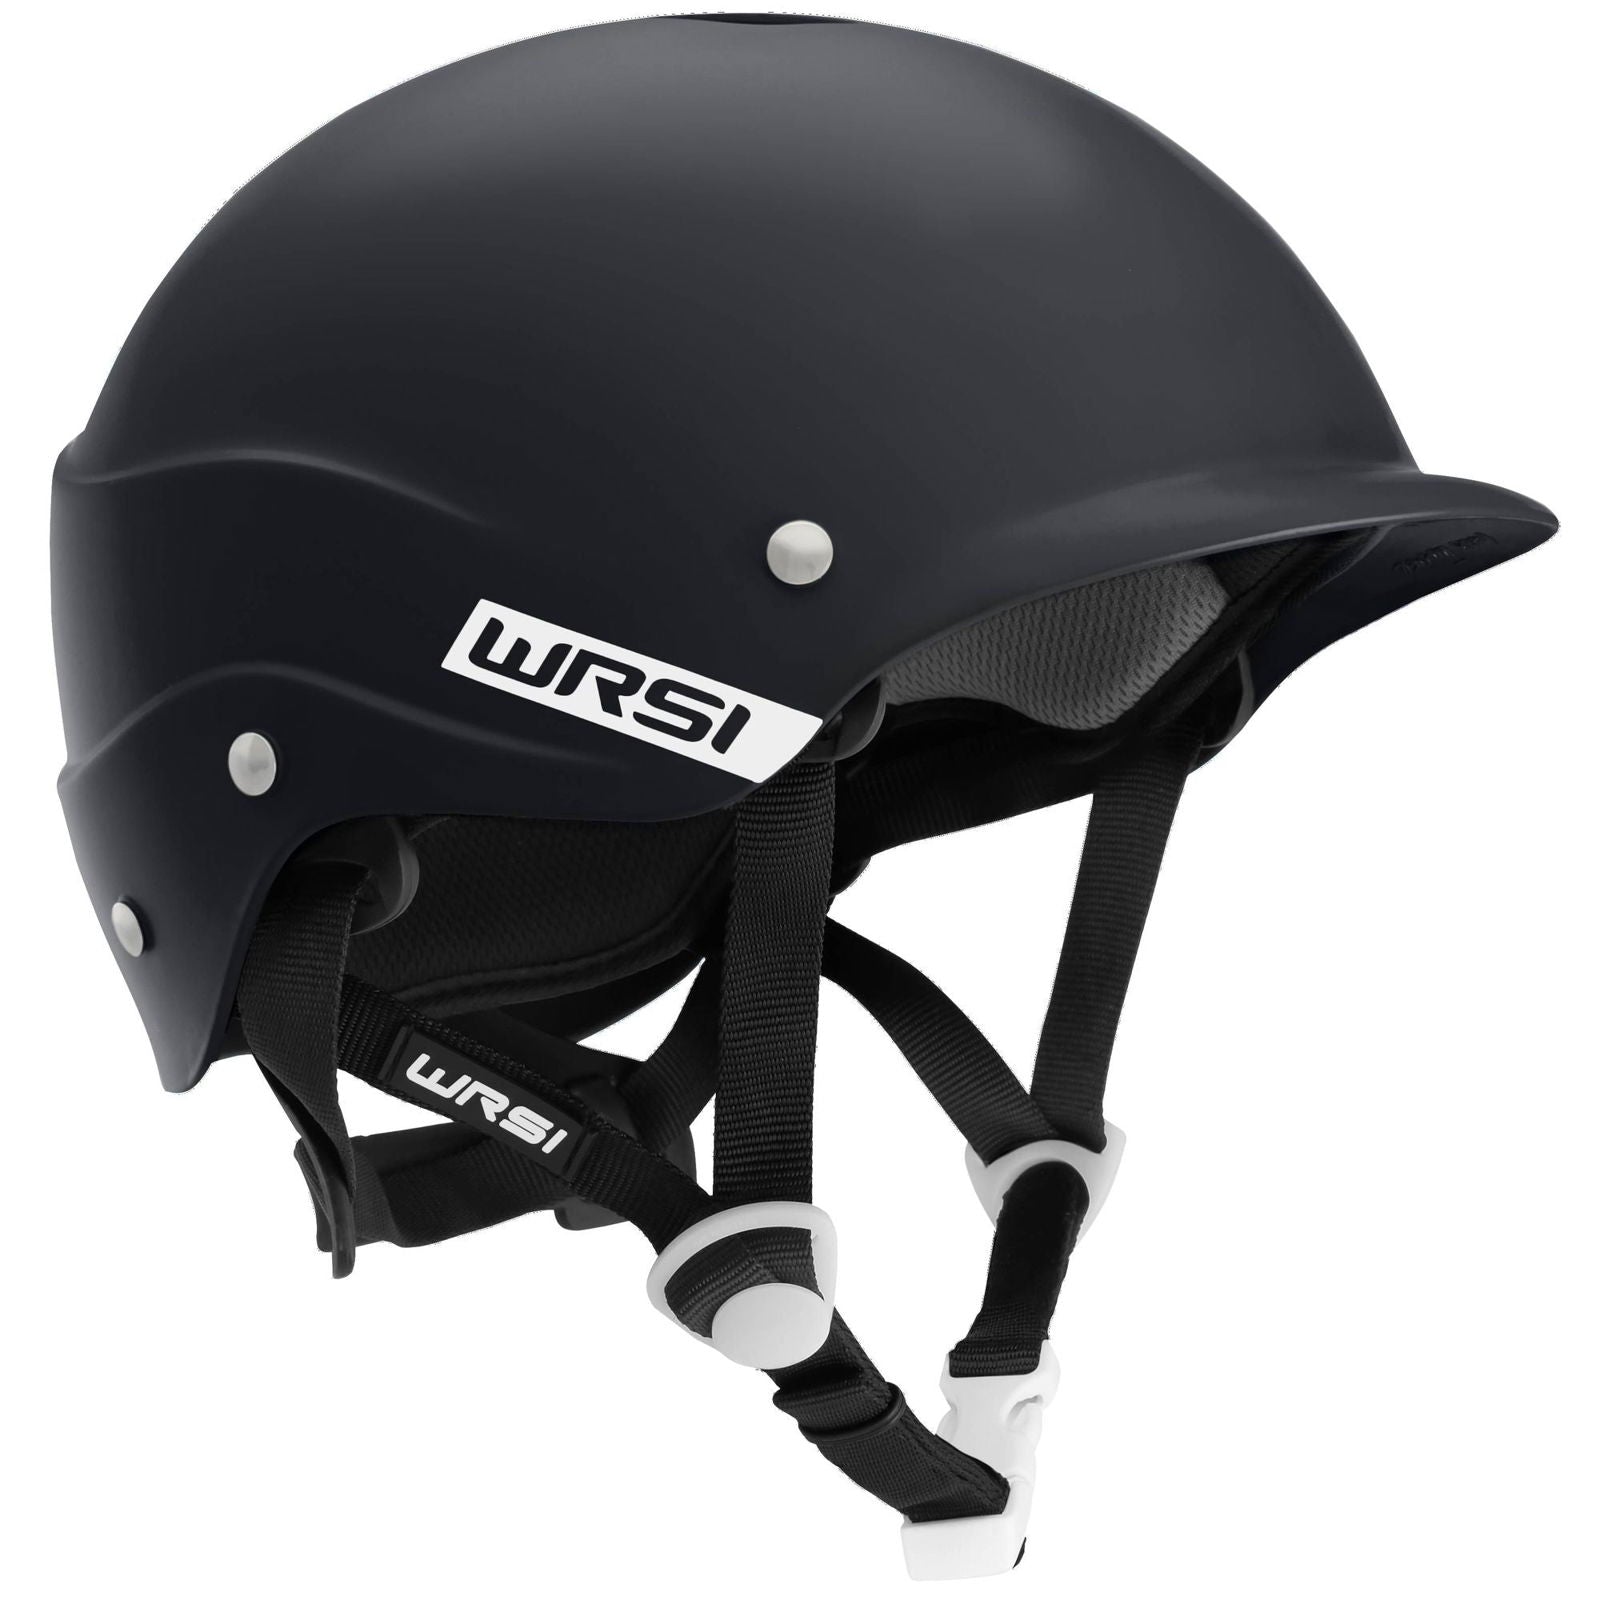   Current Helmet  BestCoast Outfitters 